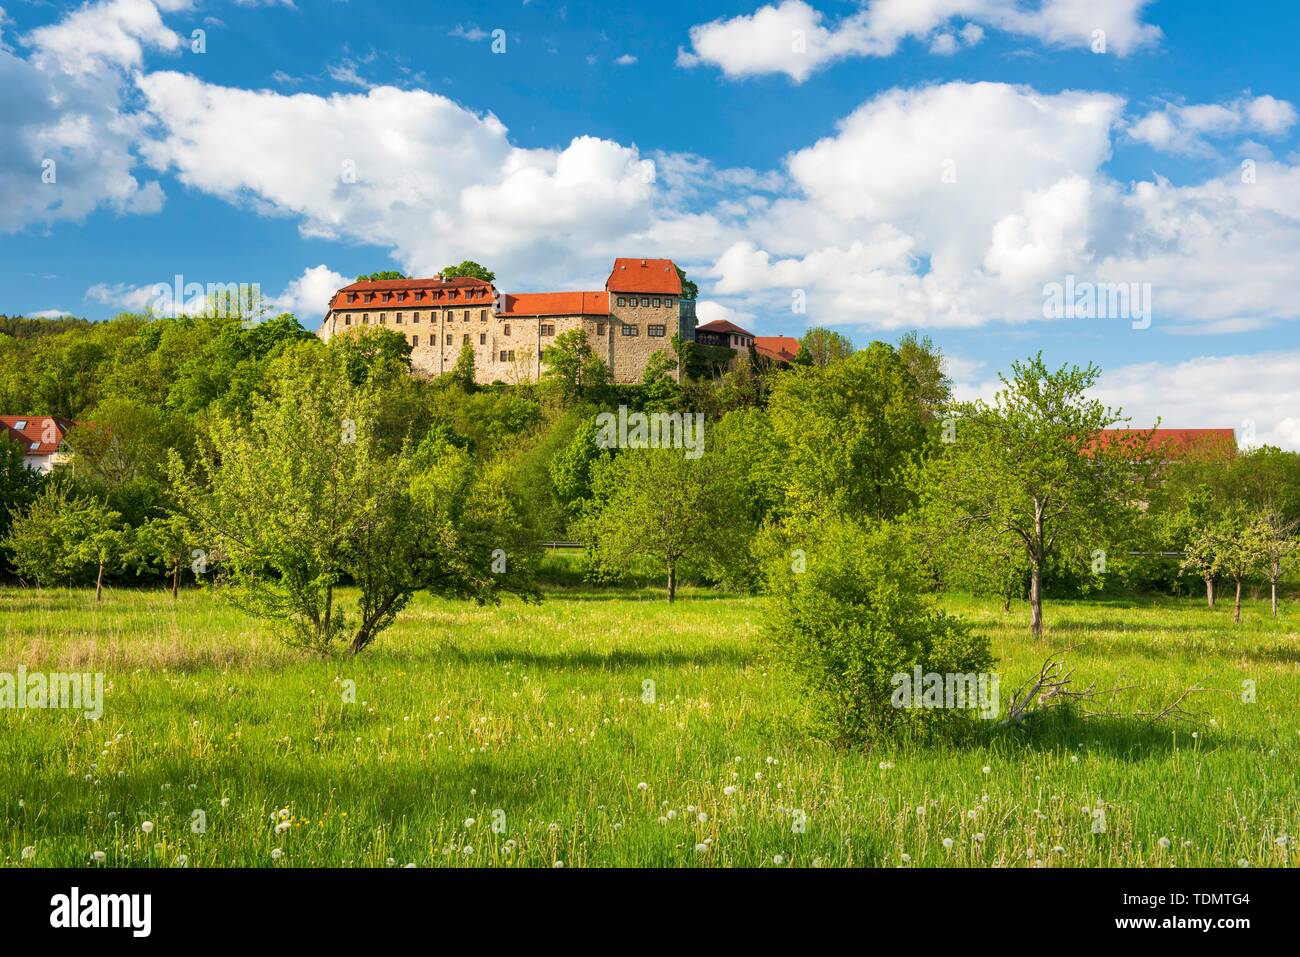 Creuzburg Castle in the Werra valley, in front orchard meadow, Creuzburg, Thuringia, Germany Stock Photo